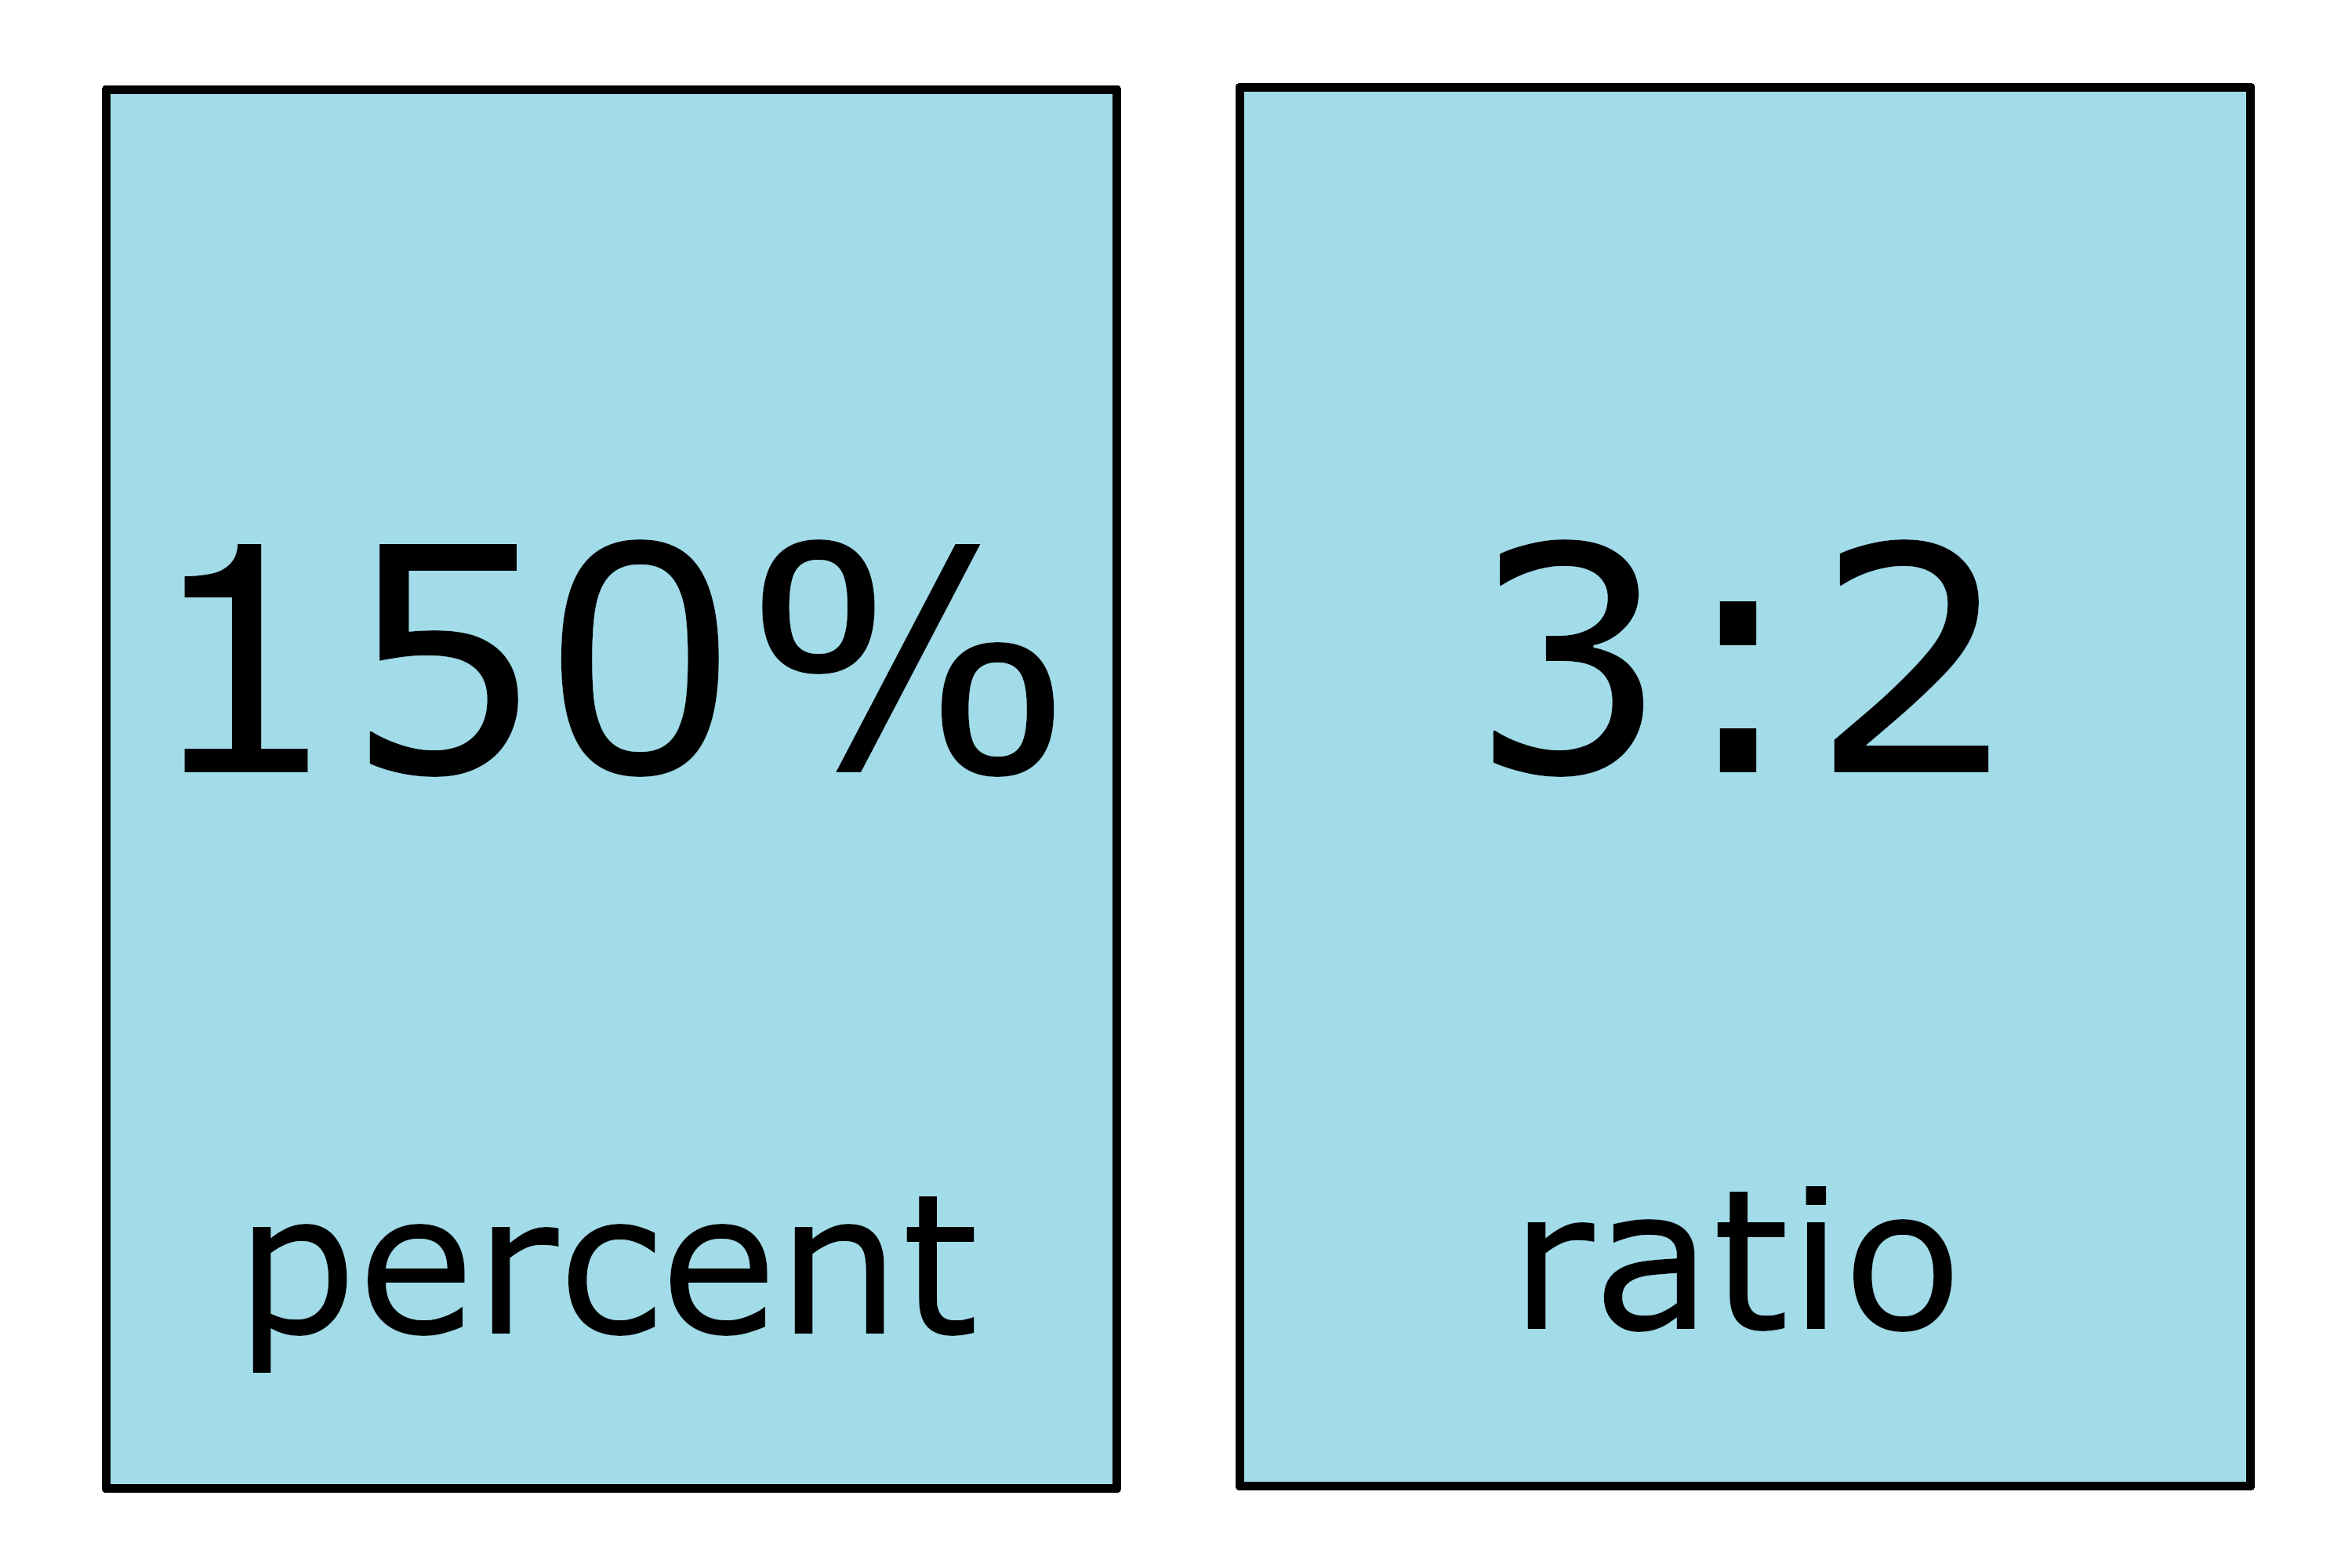 subtracting percentages on a calculator